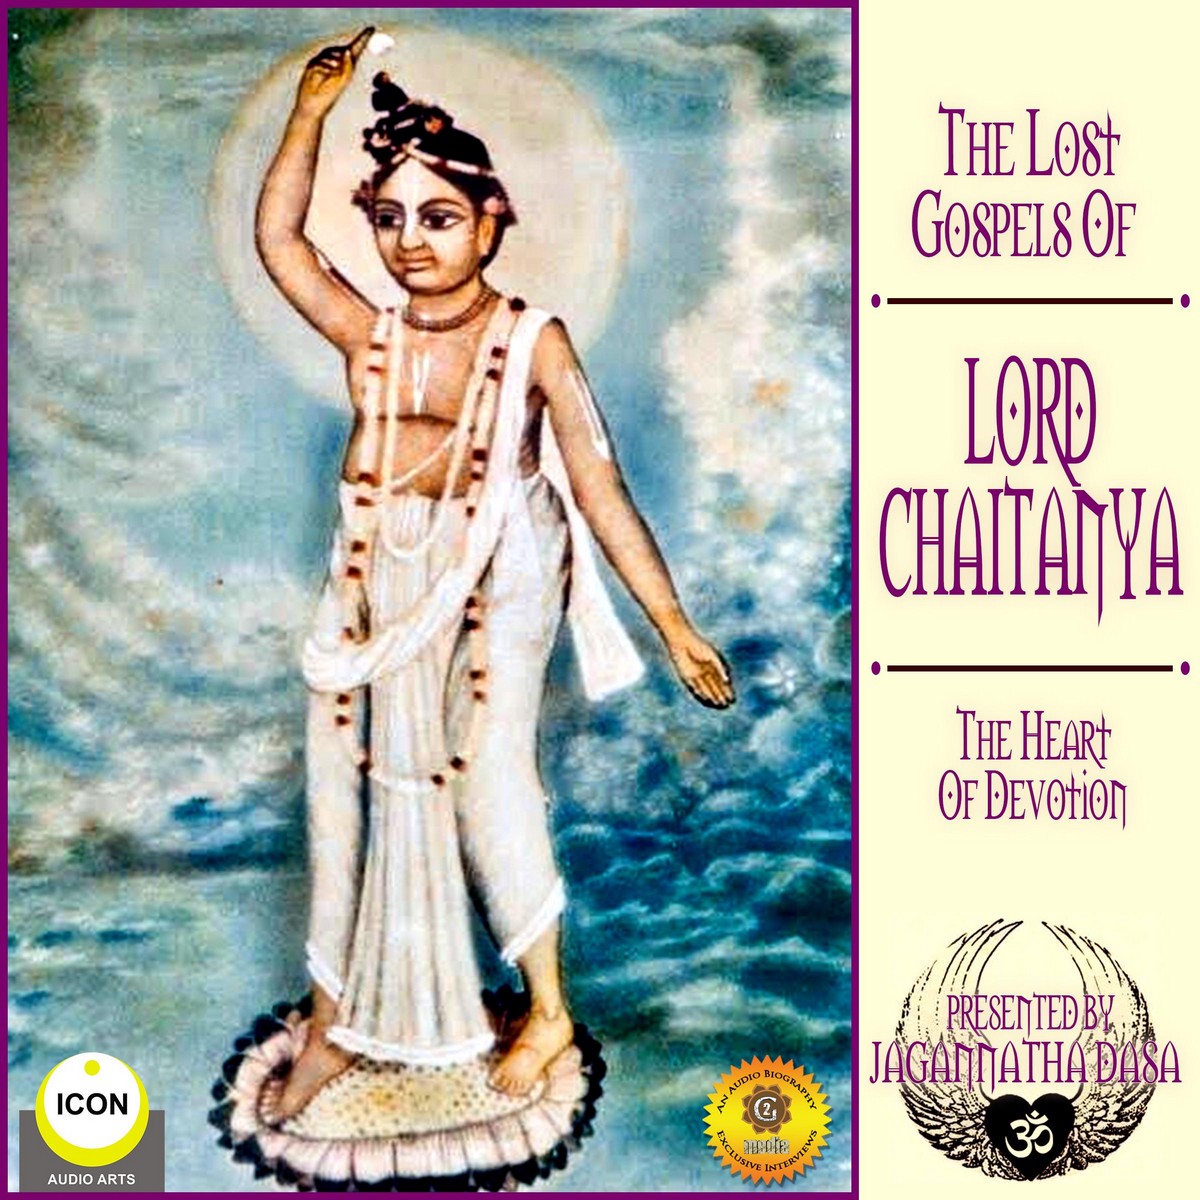 The Lost Gospels Of Lord Chaitanya – The heart Of Devotion